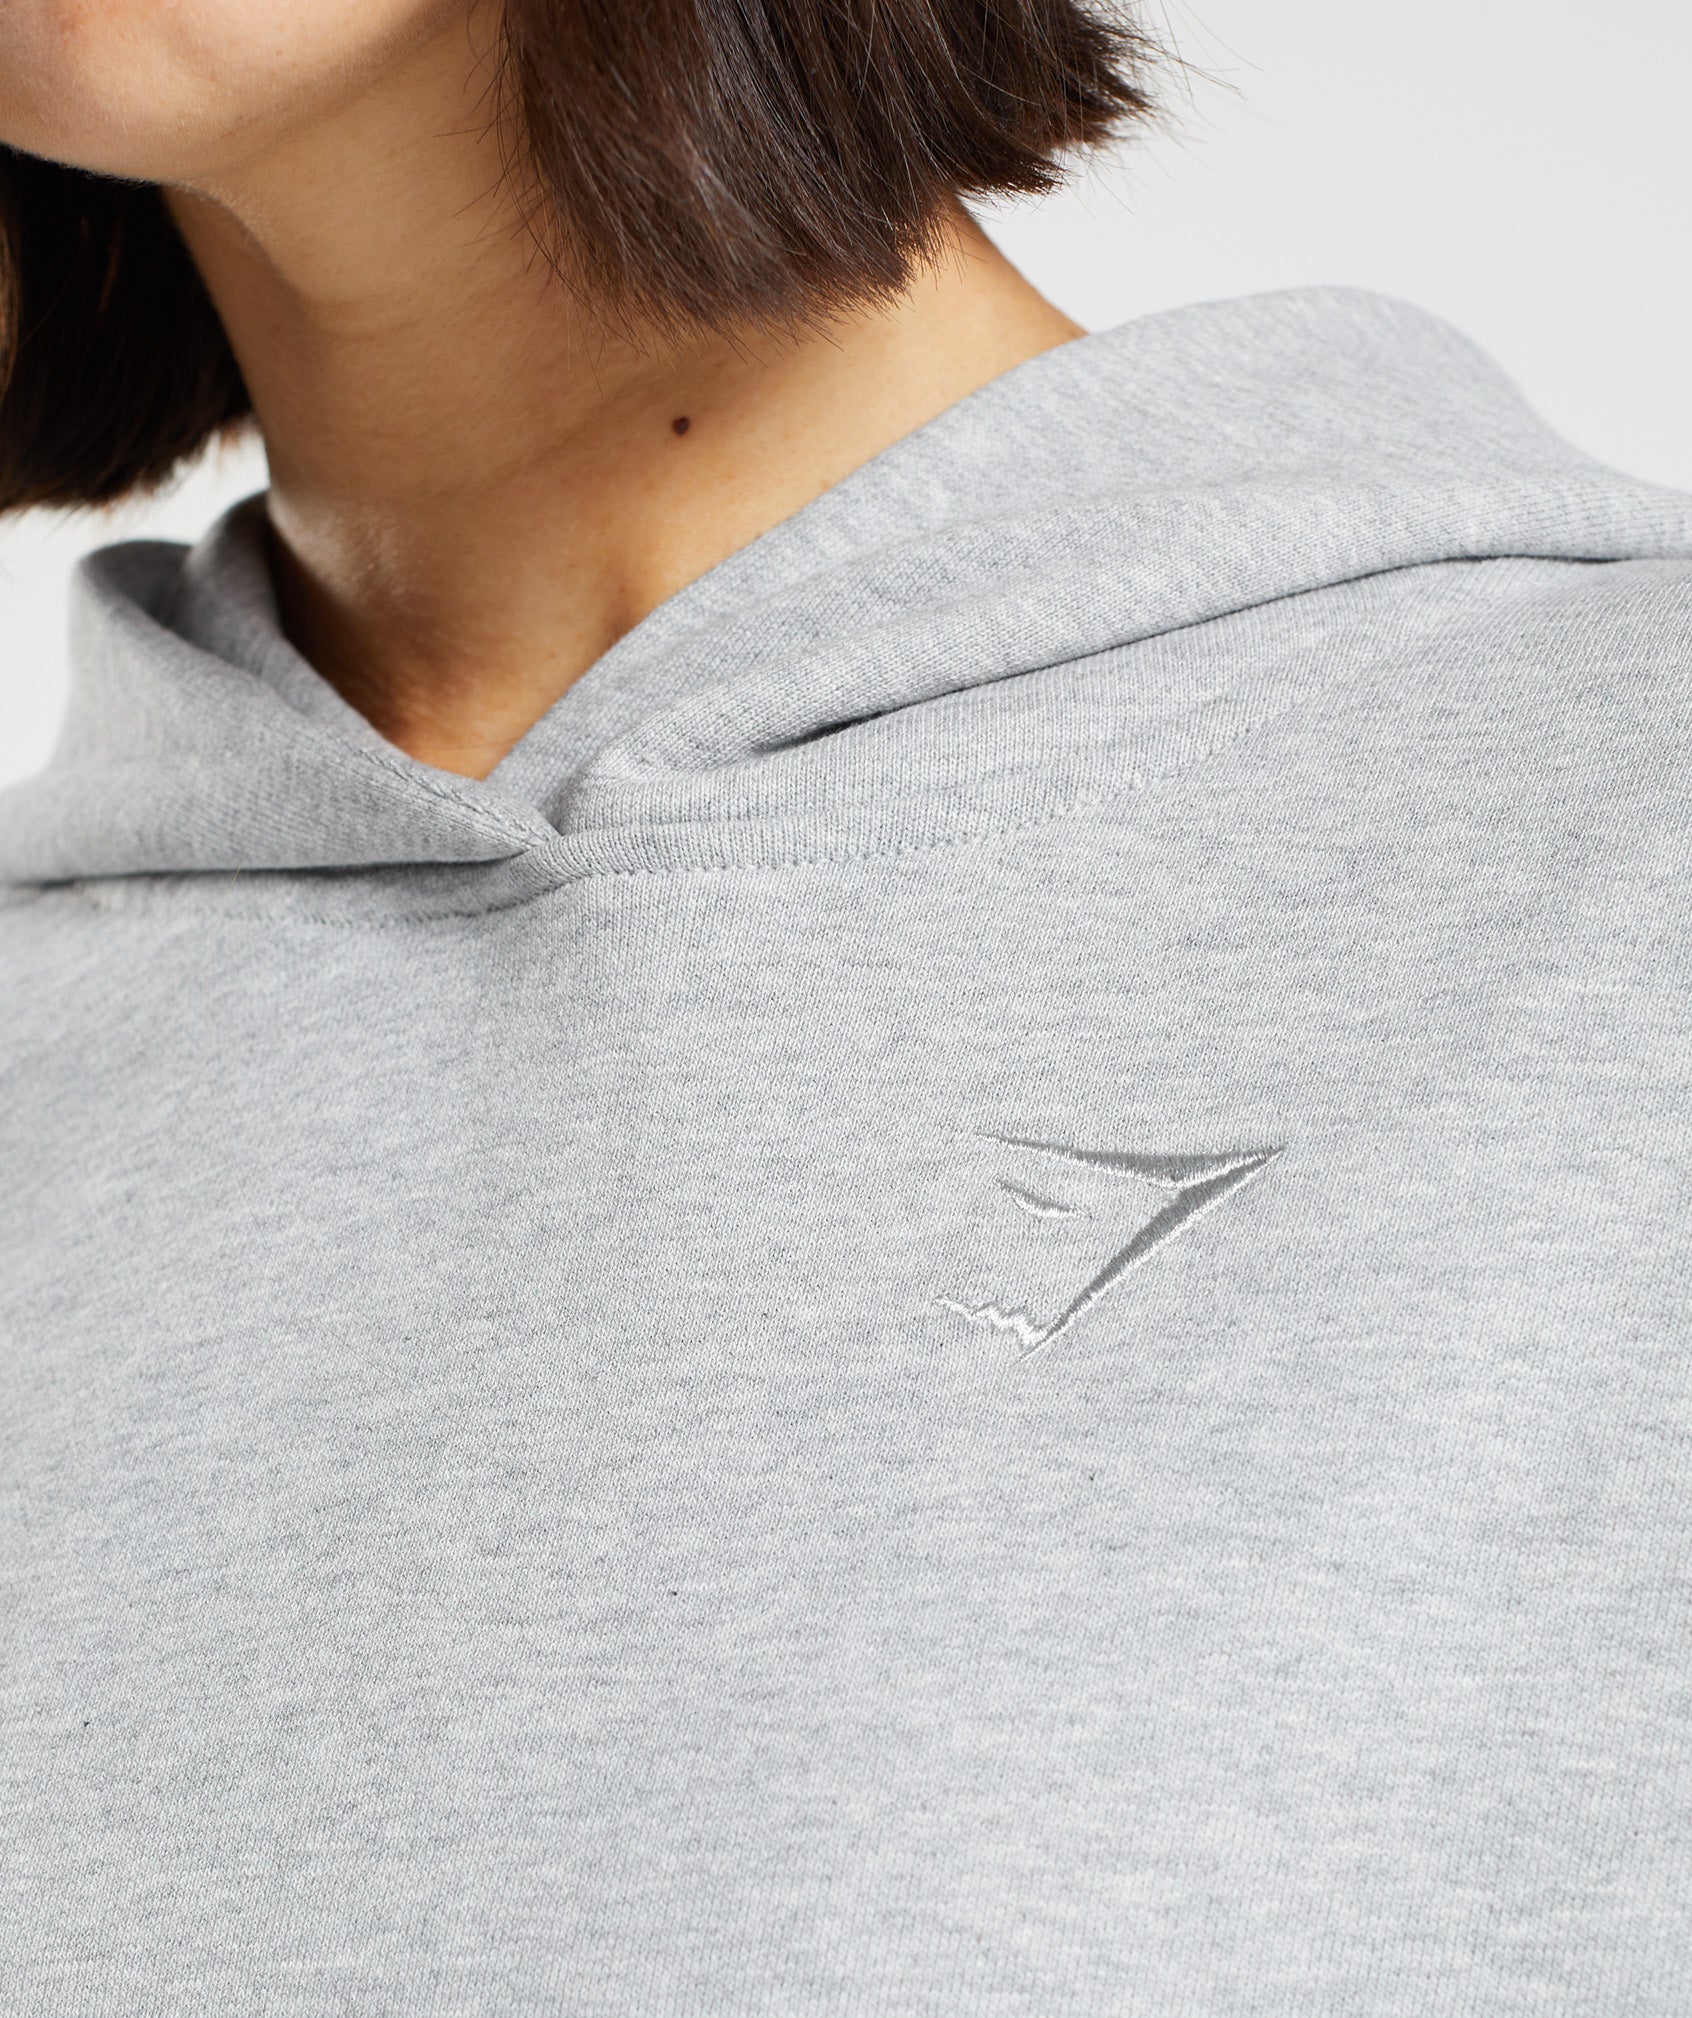 Rest Day Sweats Hoodie in Light Grey Core Marl - view 6